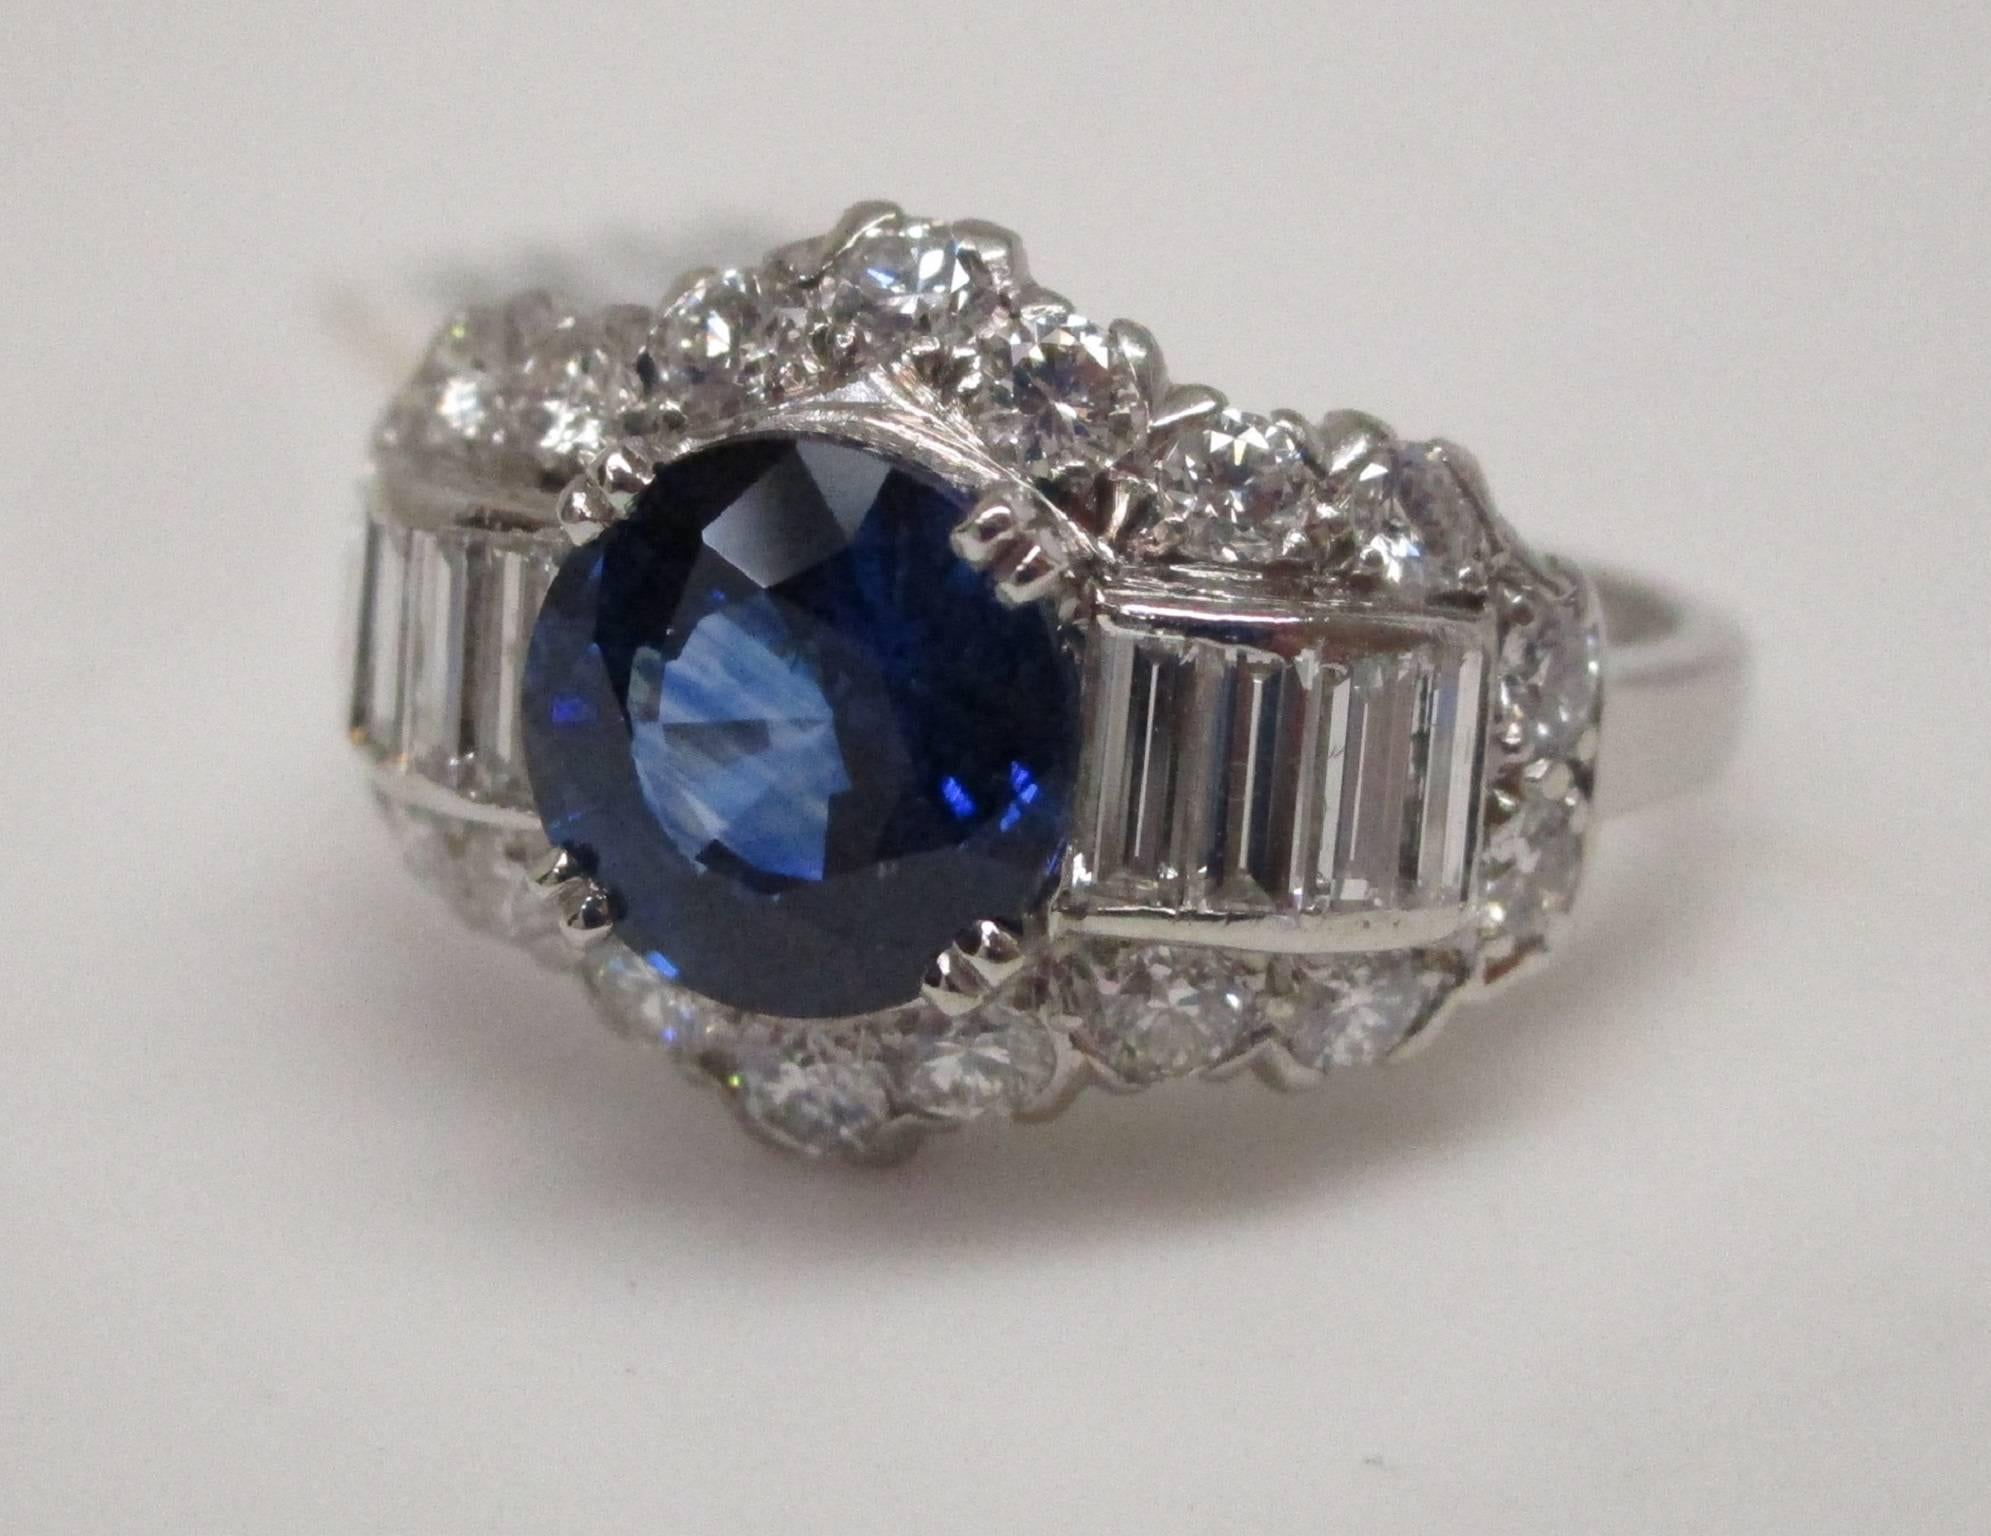 Why have an engagement ring that anyone can have? This is a stunning Platinum engagement ring with a vibrant blue Sapphire in the center and surrounding radiant round and baguette Diamonds. Being a vintage piece, you're not likely to see this ring